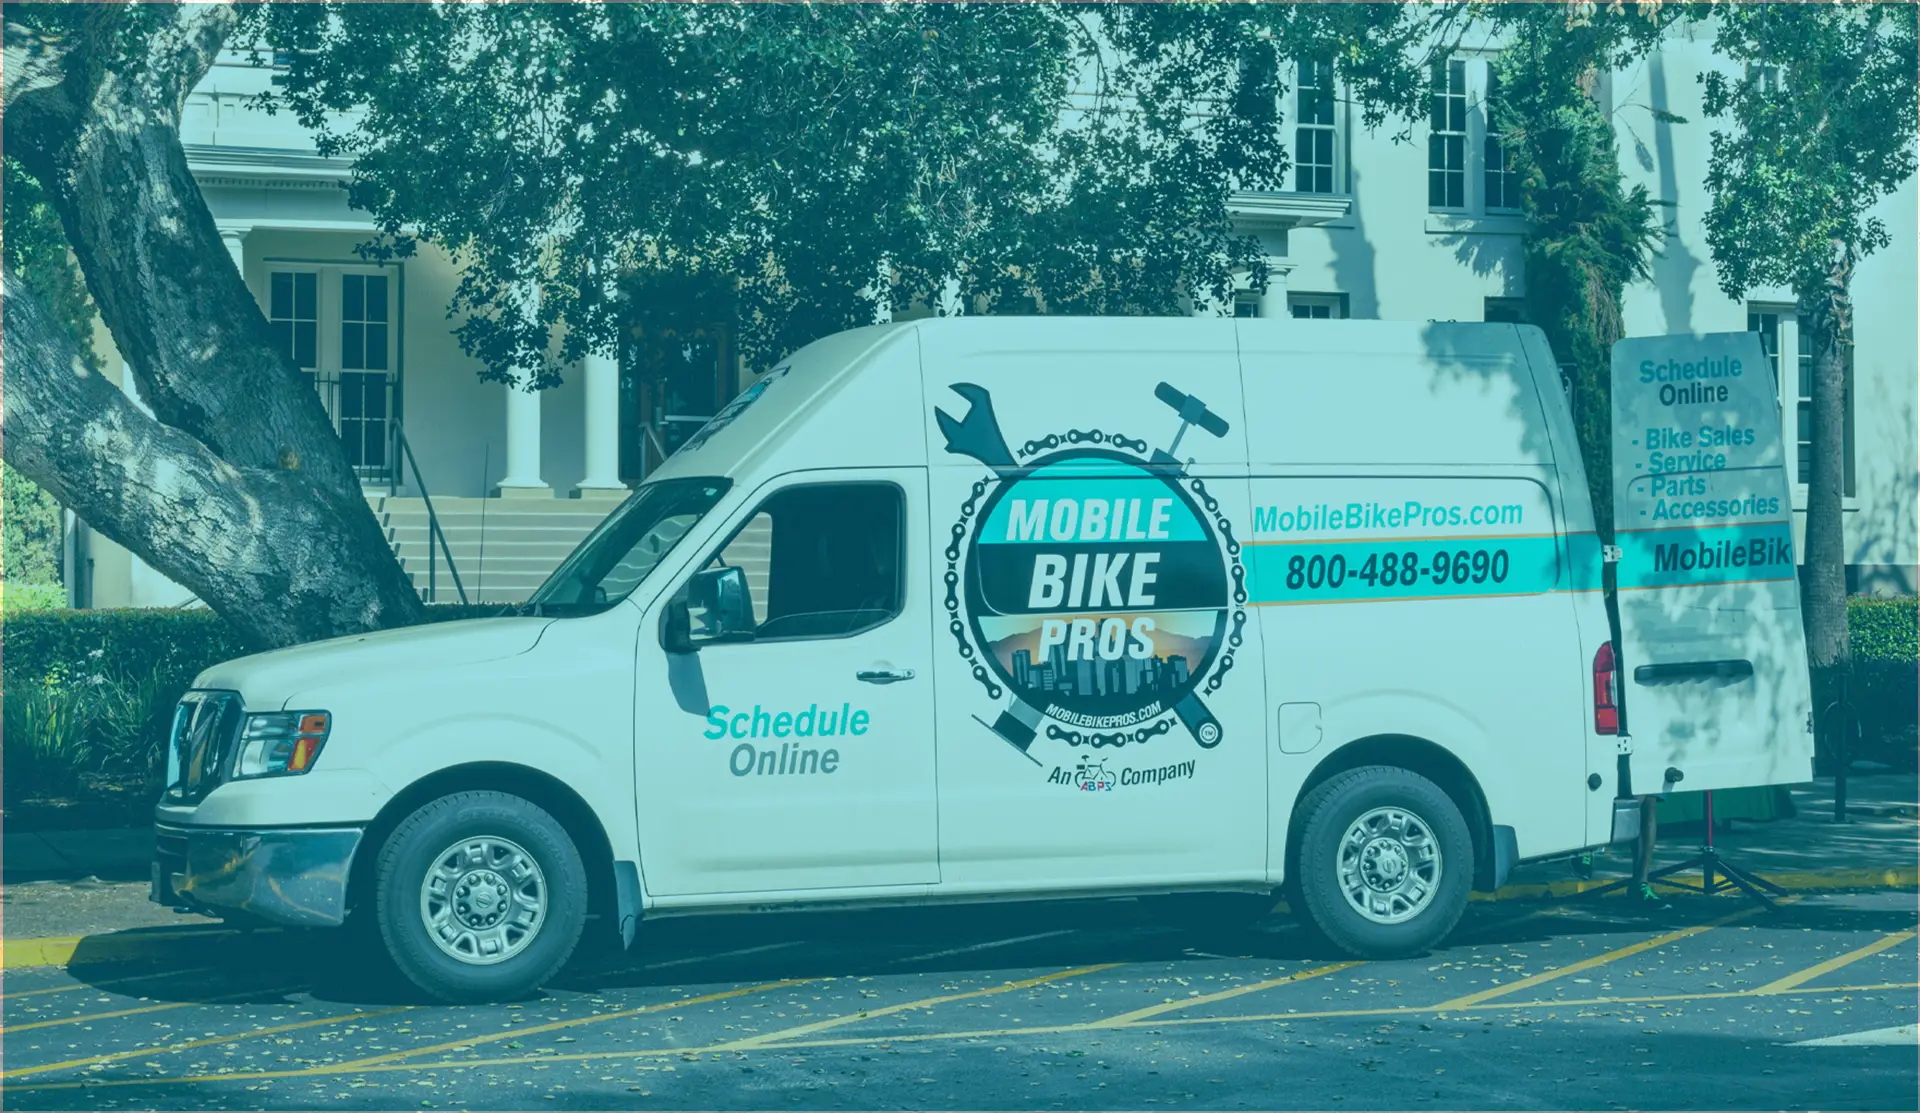 Mobile Bike Pros van servicing at a college campus.